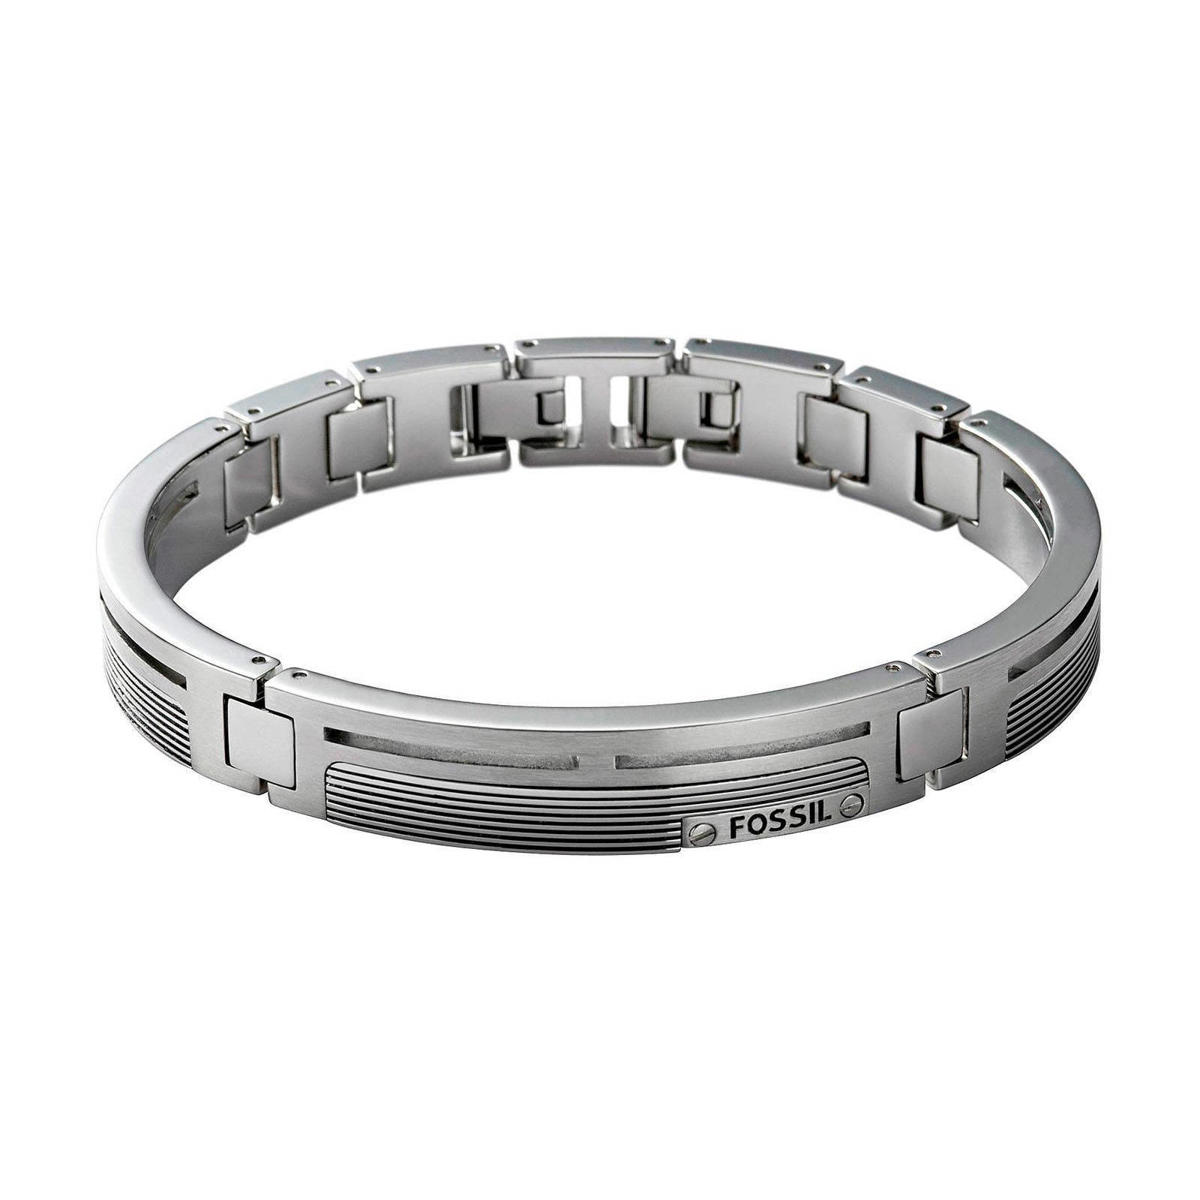 chef mooi Montgomery Fossil armband JF84476040 zilver | wehkamp